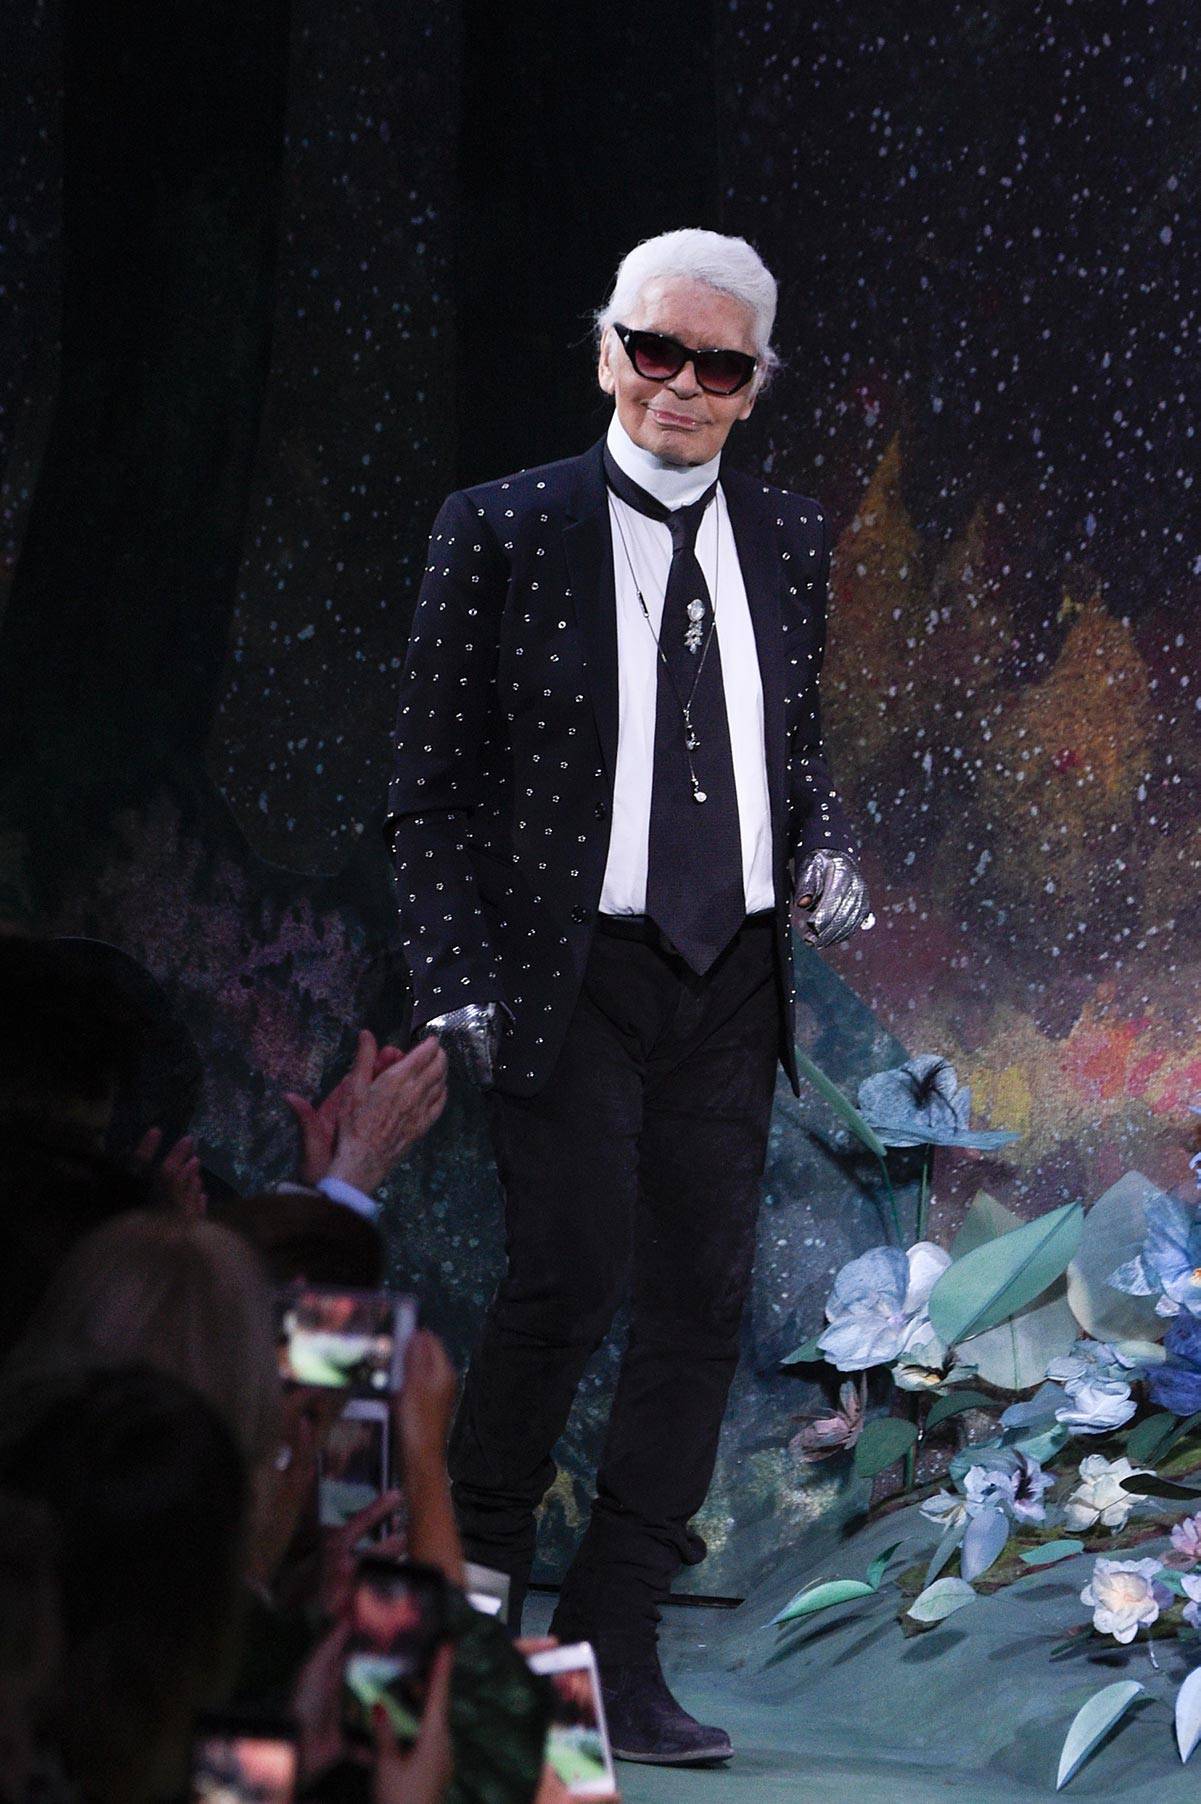 Karl Lagerfeld, Haute Couture Paris Fashion 2017 (Fot. Peter White/Getty Images)